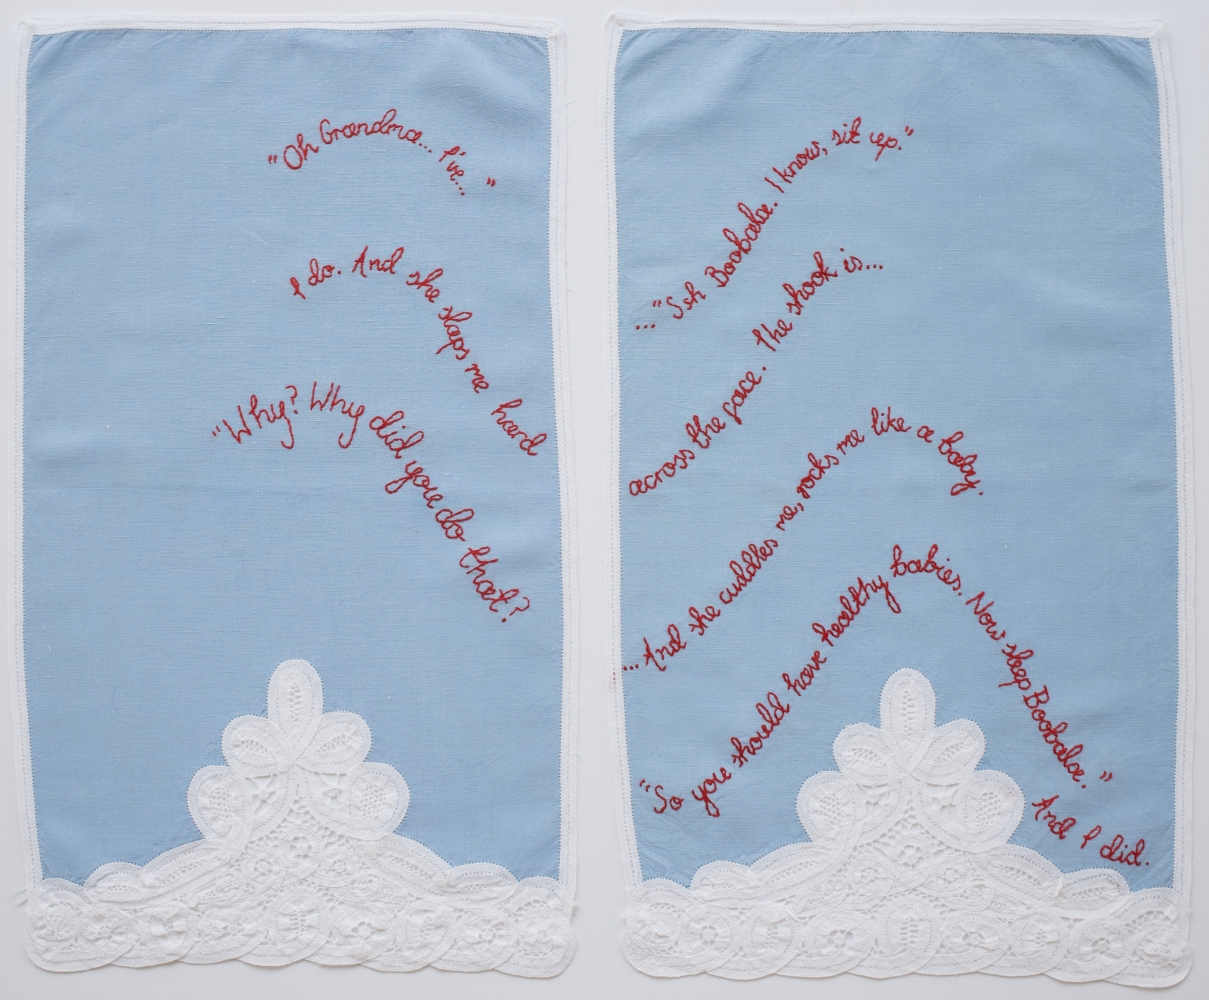 Ssh Boobala, 2019
Embroidery on vintage linen tea towels
18.5&amp;nbsp;x 22 inches
&amp;nbsp;